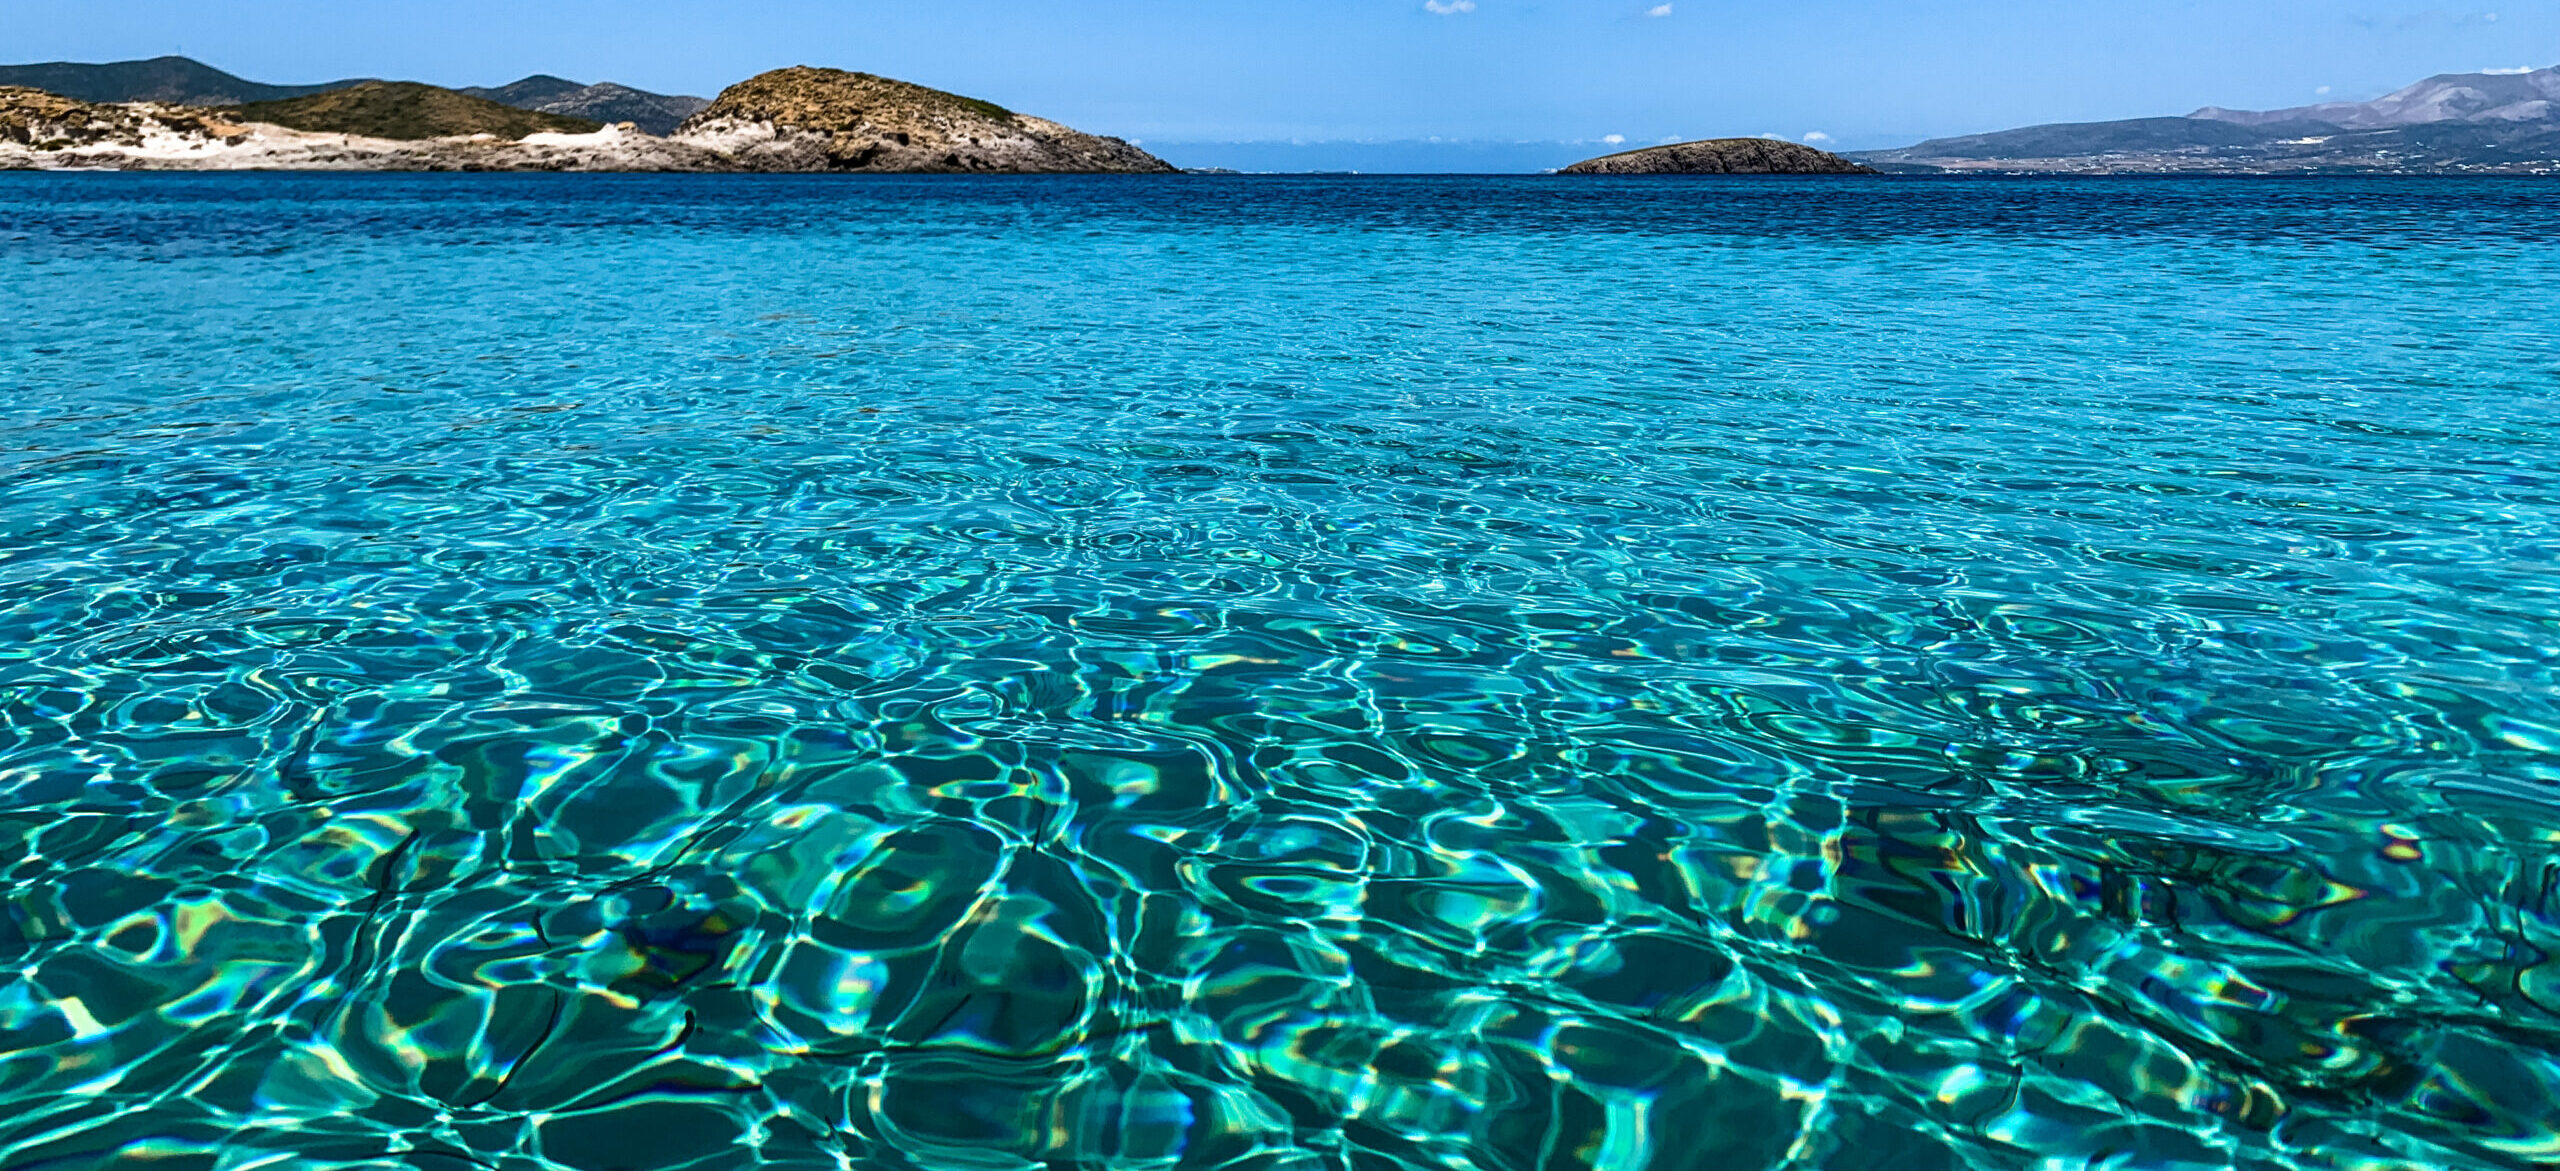 Antiparos – The Greek island that was given as a dowry